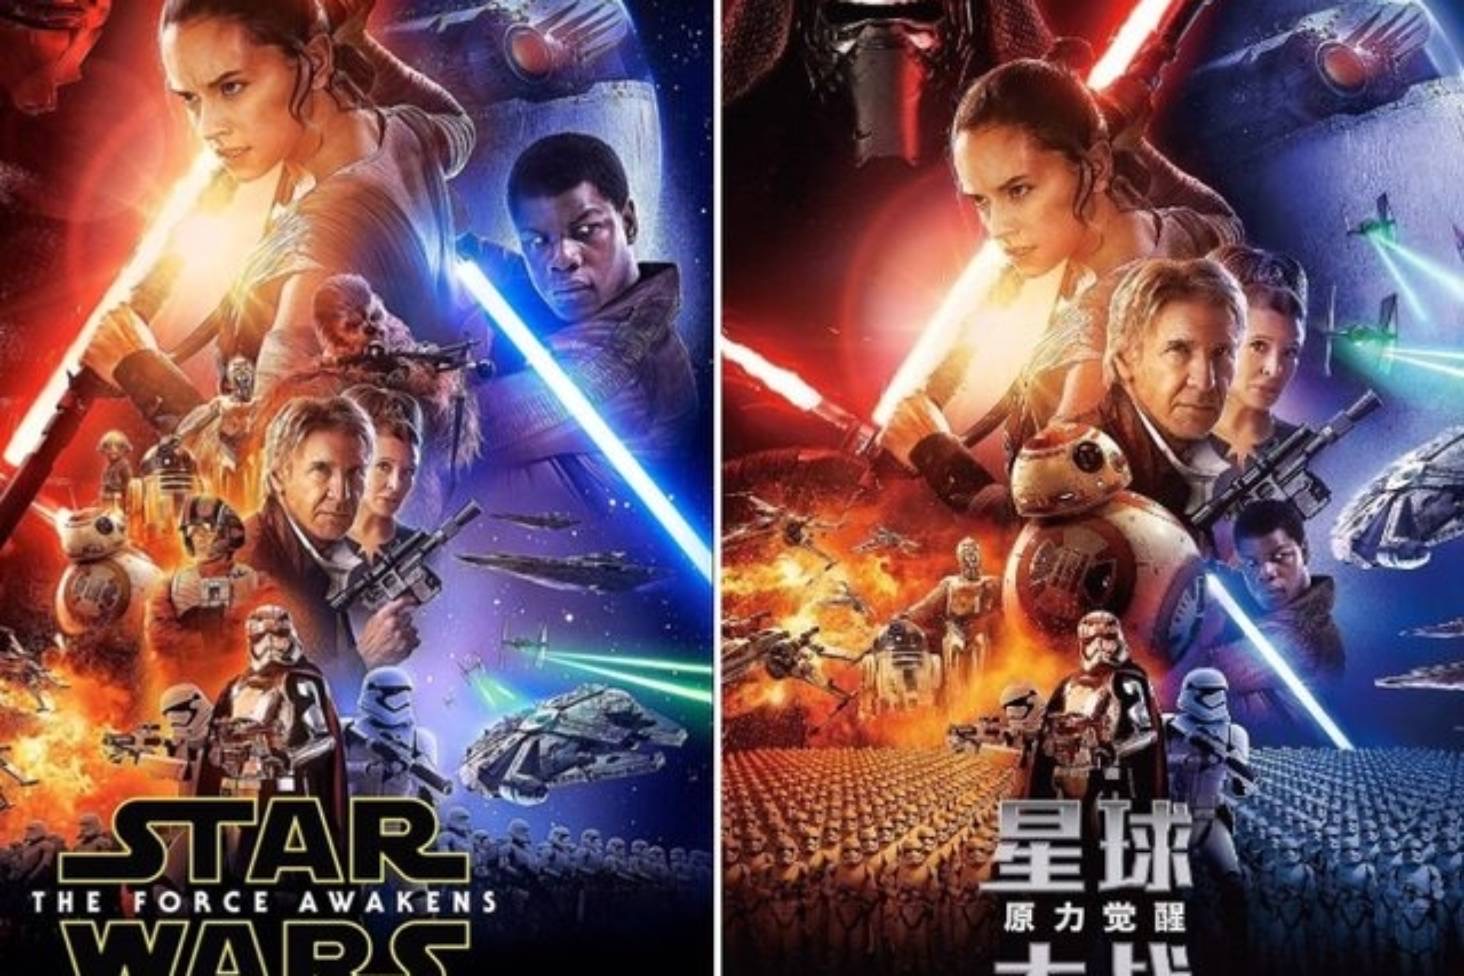 "Star Wars VII: The Force Awakens" Posters